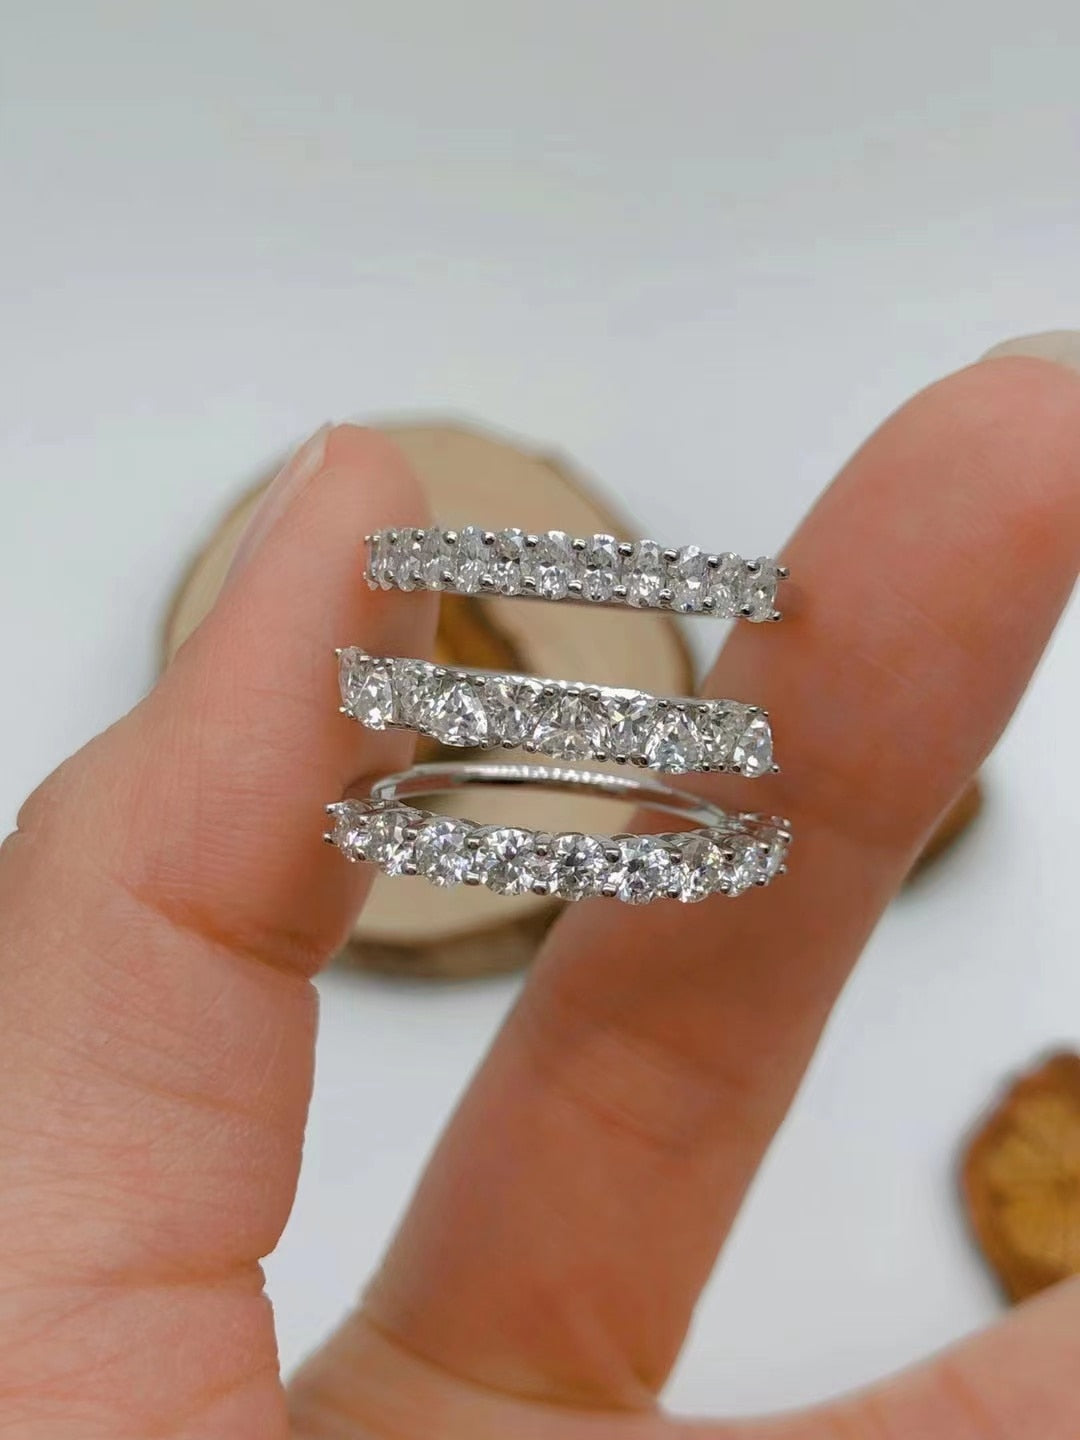 A hand holding half eternity rings with various cuts of moissanite.